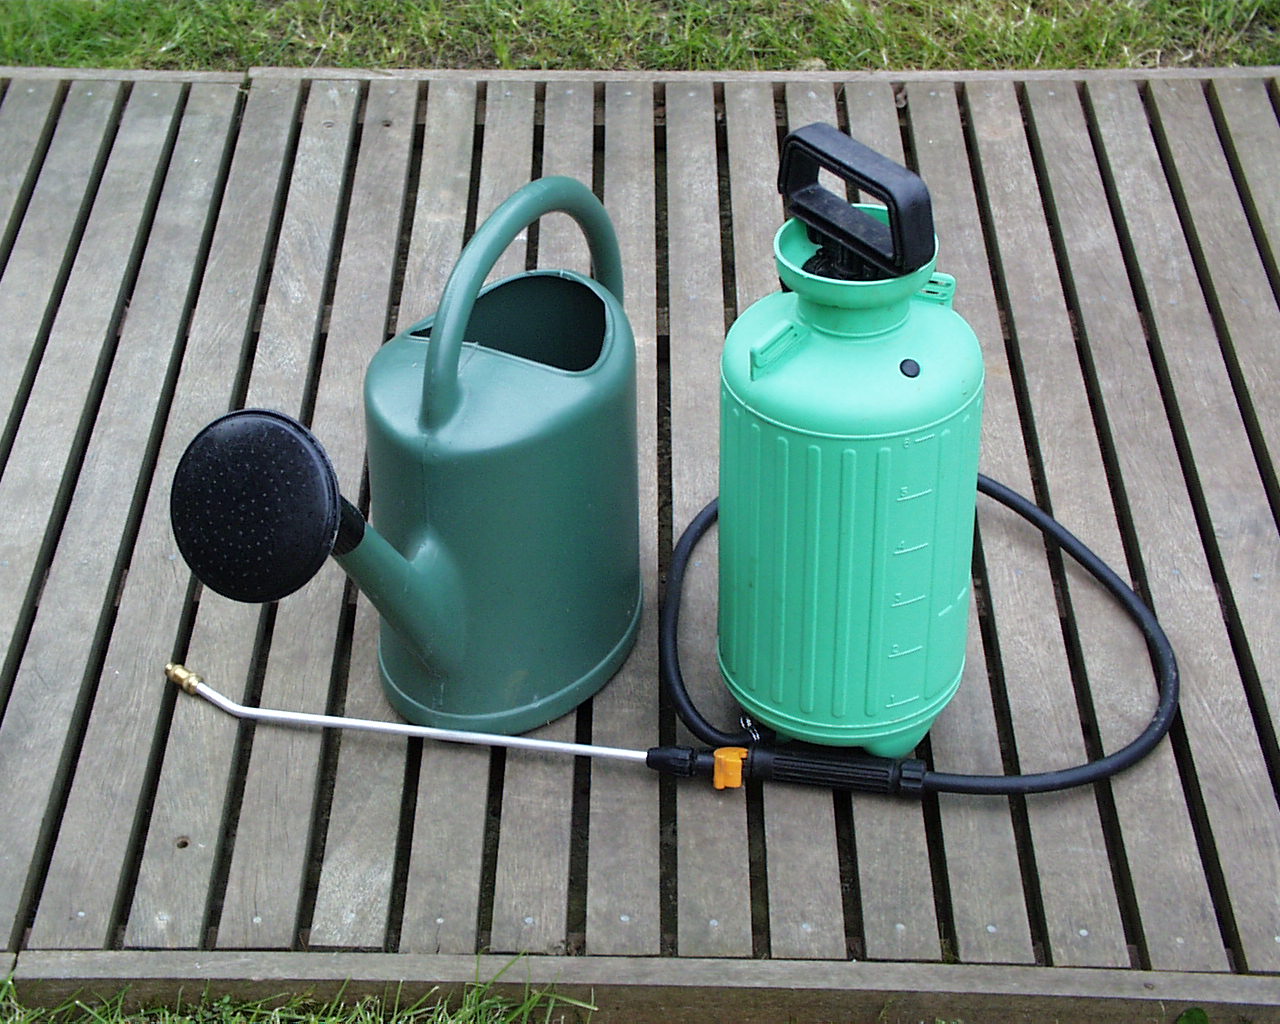 Equipment for application of the ACP biocide mix.